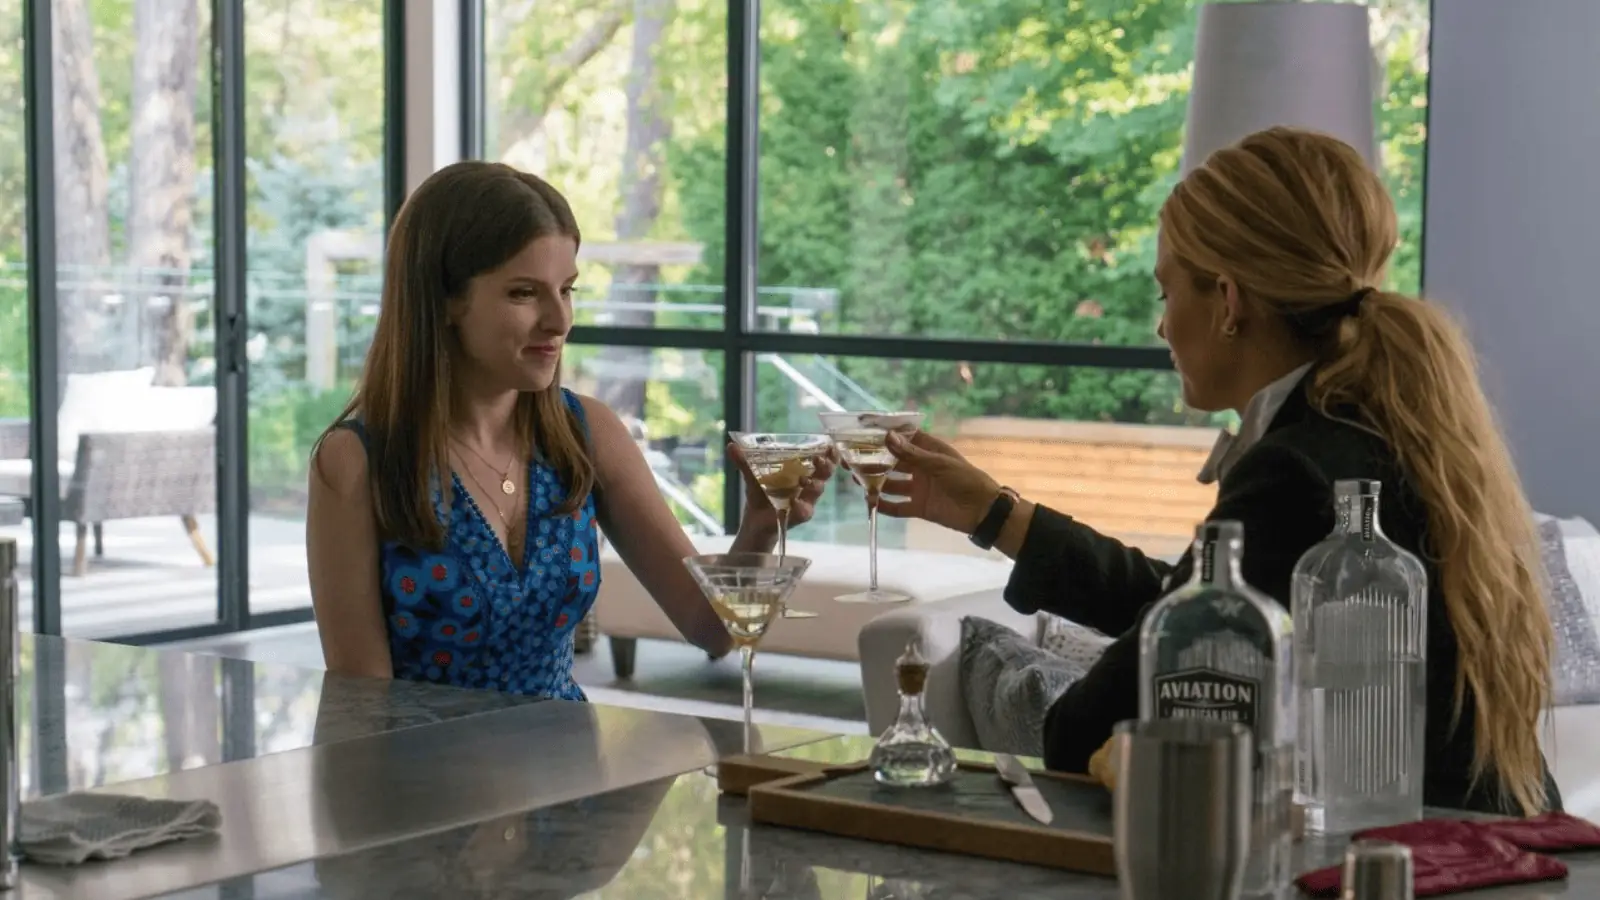 Scene from A Simple Favor